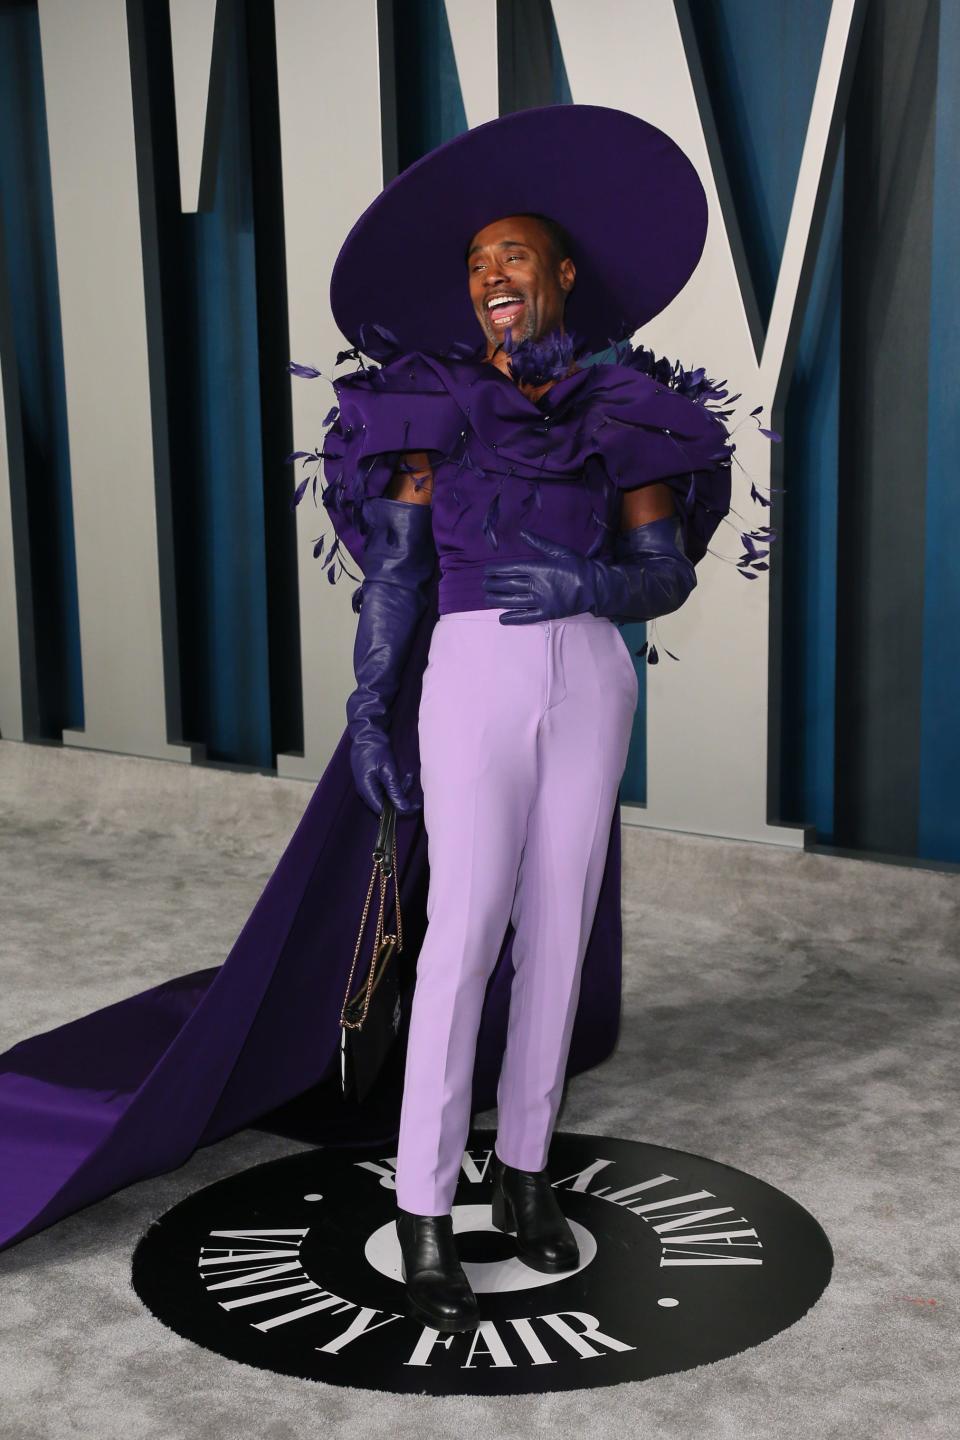 Billy Porter at the 2020 Oscars' Vanity Fair party wearing a purple gown and large hat